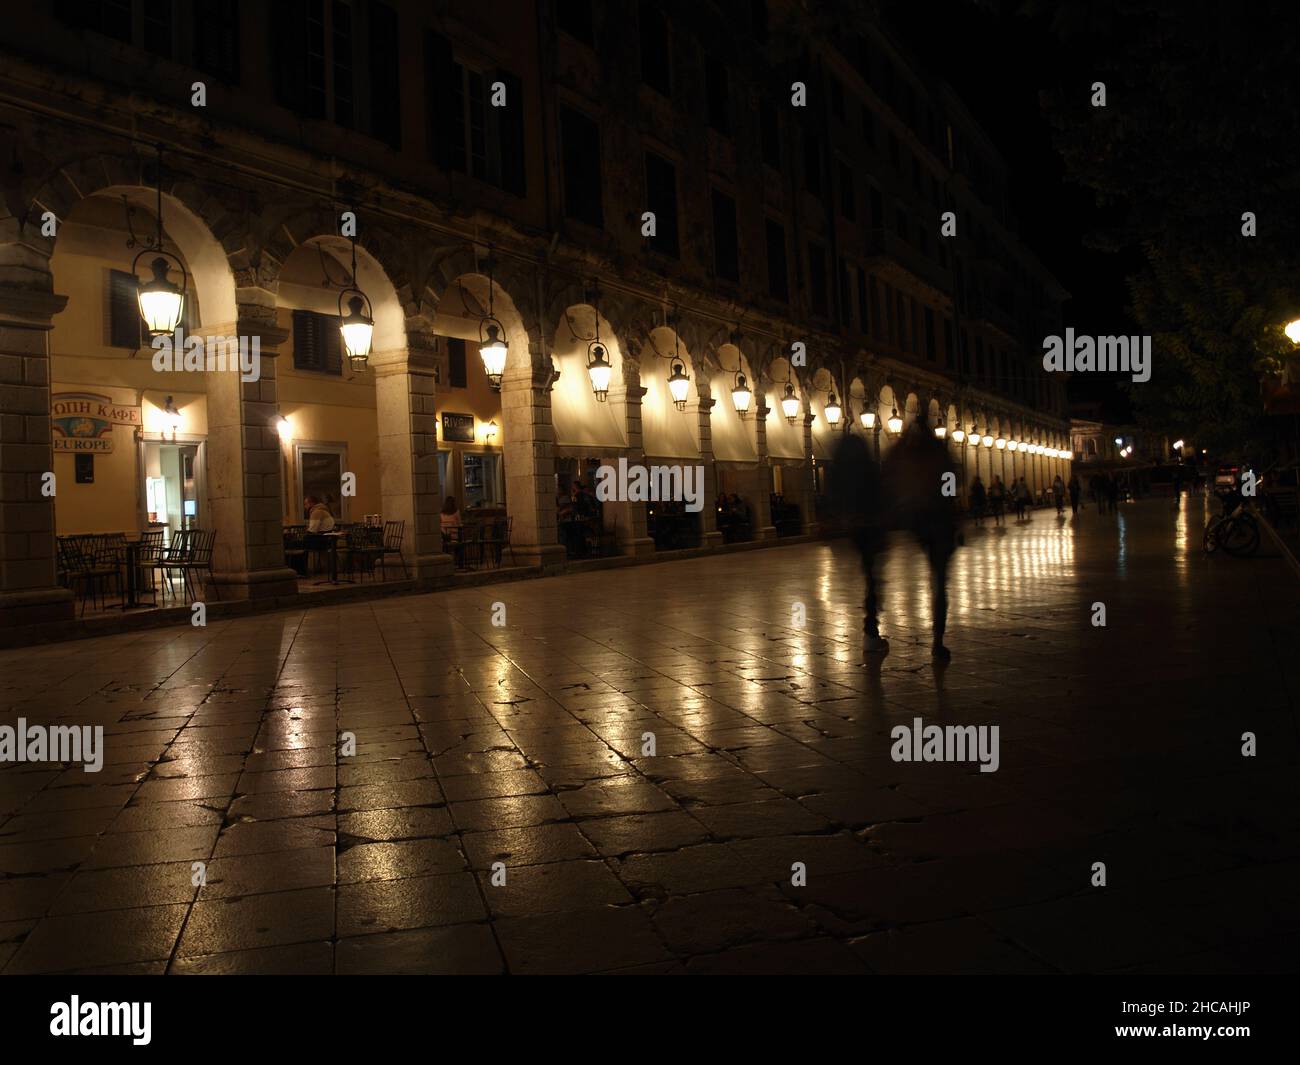 Lights reflecting on pavement at night time at The Liston; Corfu Town, Greece Stock Photo